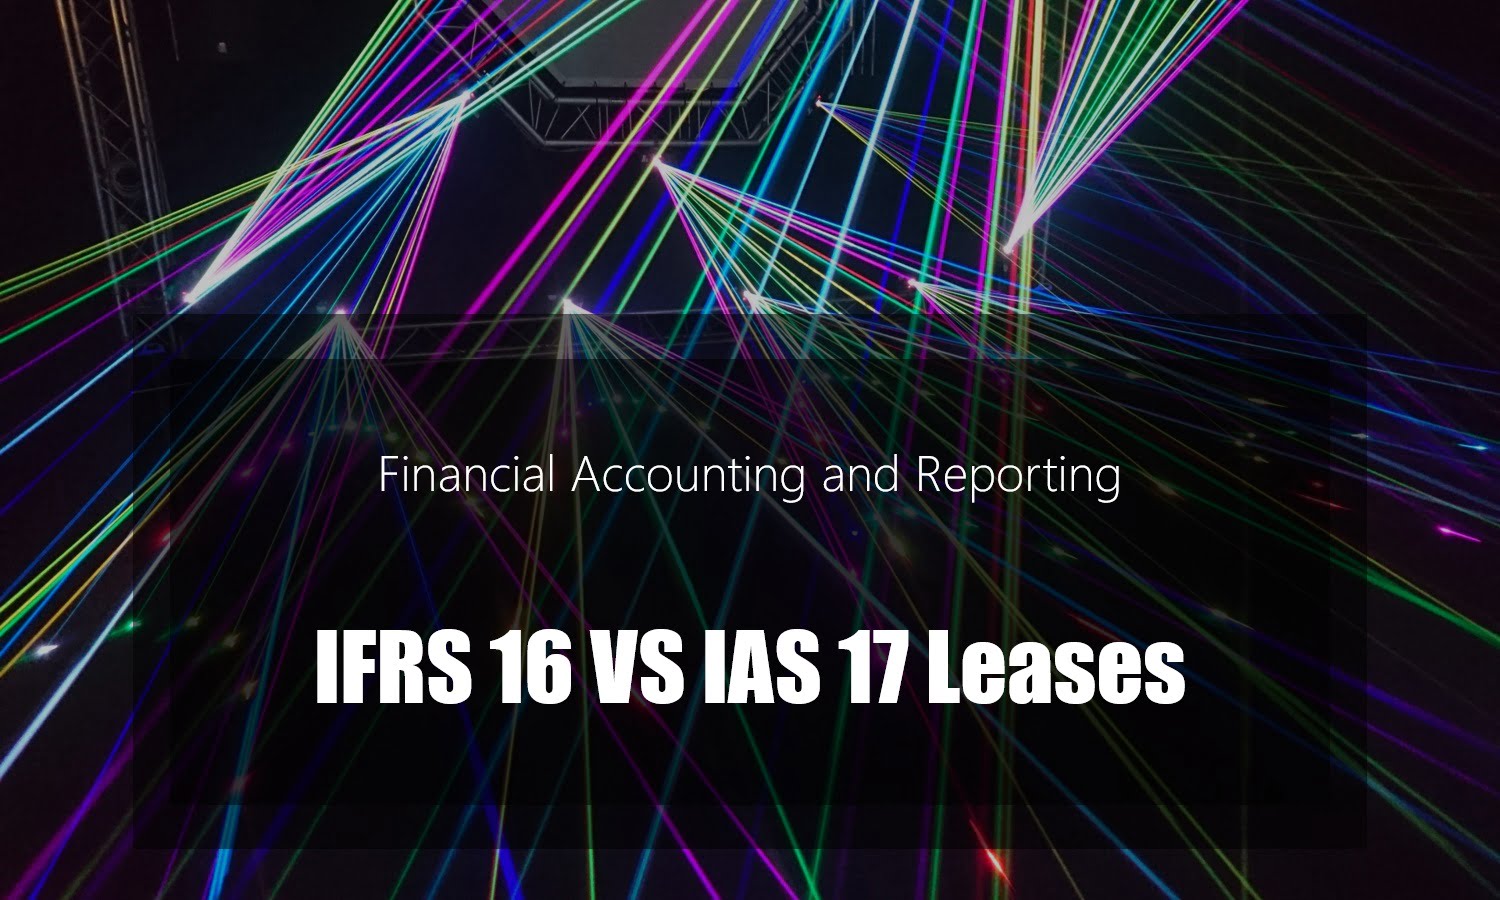 Difference between IAS 17 and IFRS Lease